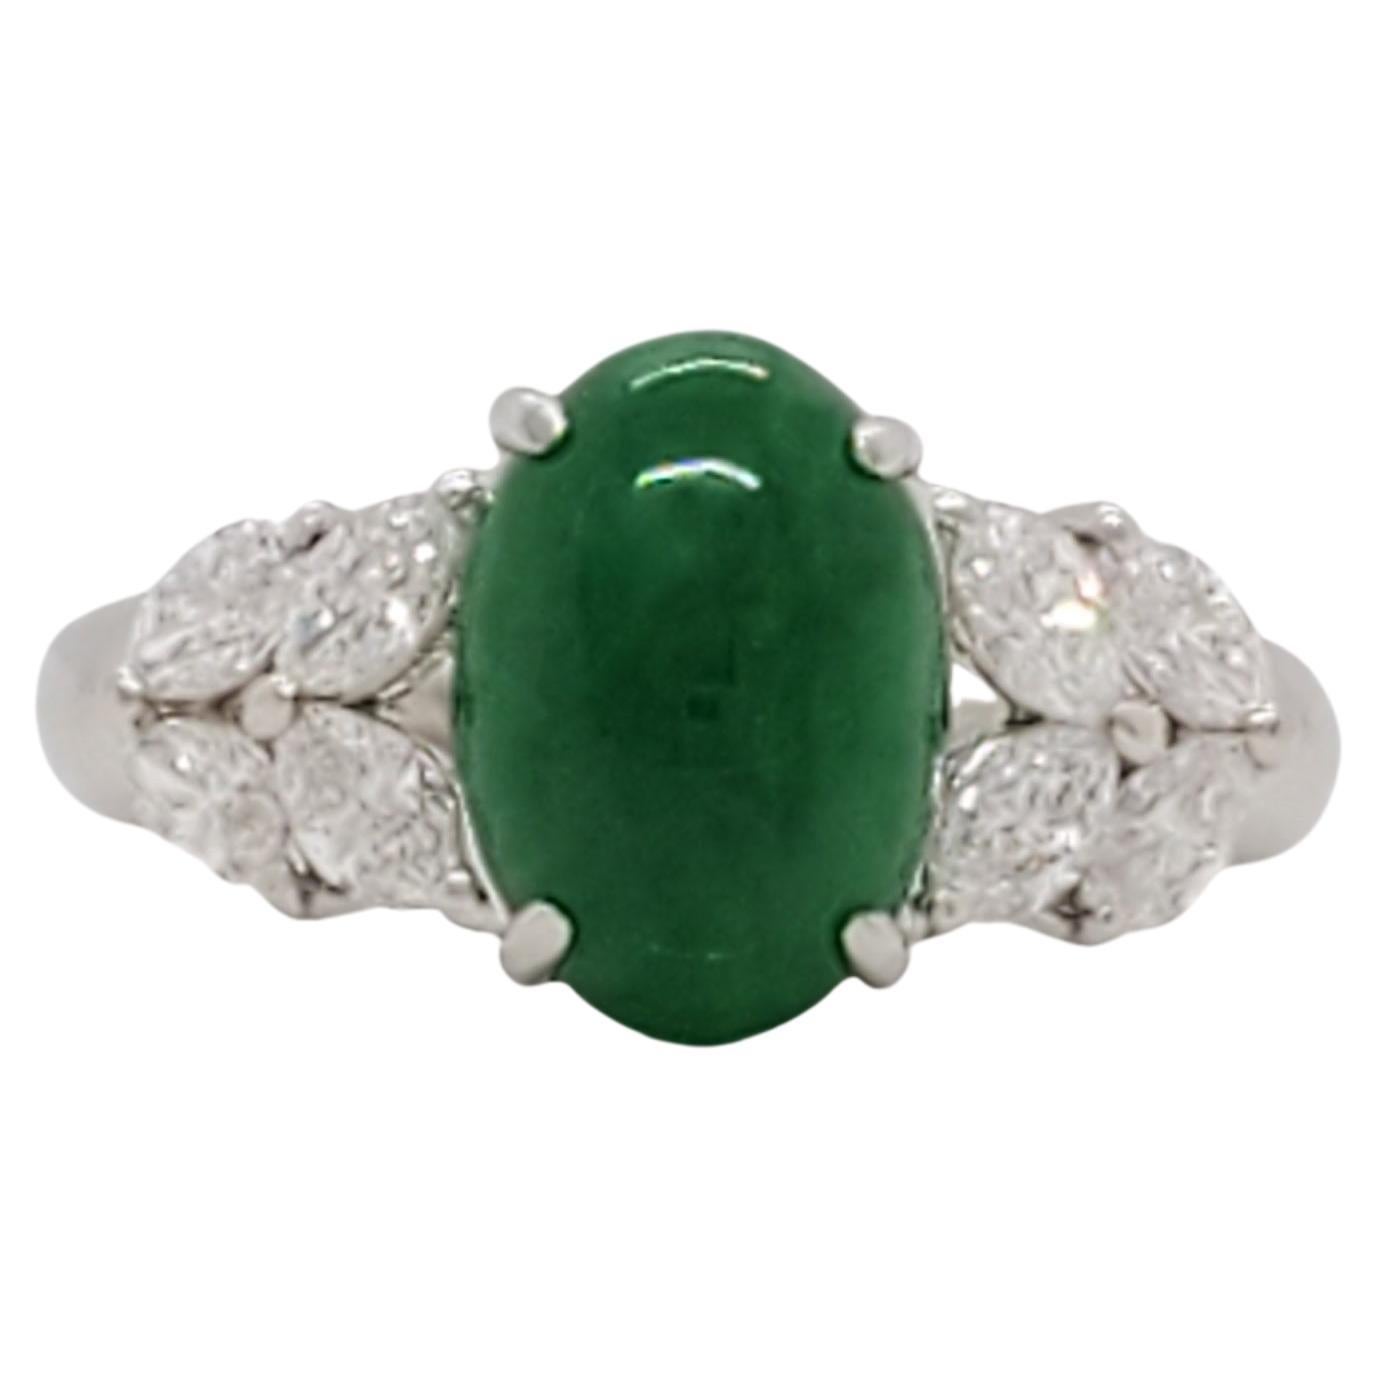 Green Jade Cabochon and Diamond Cocktail Ring in Platinum